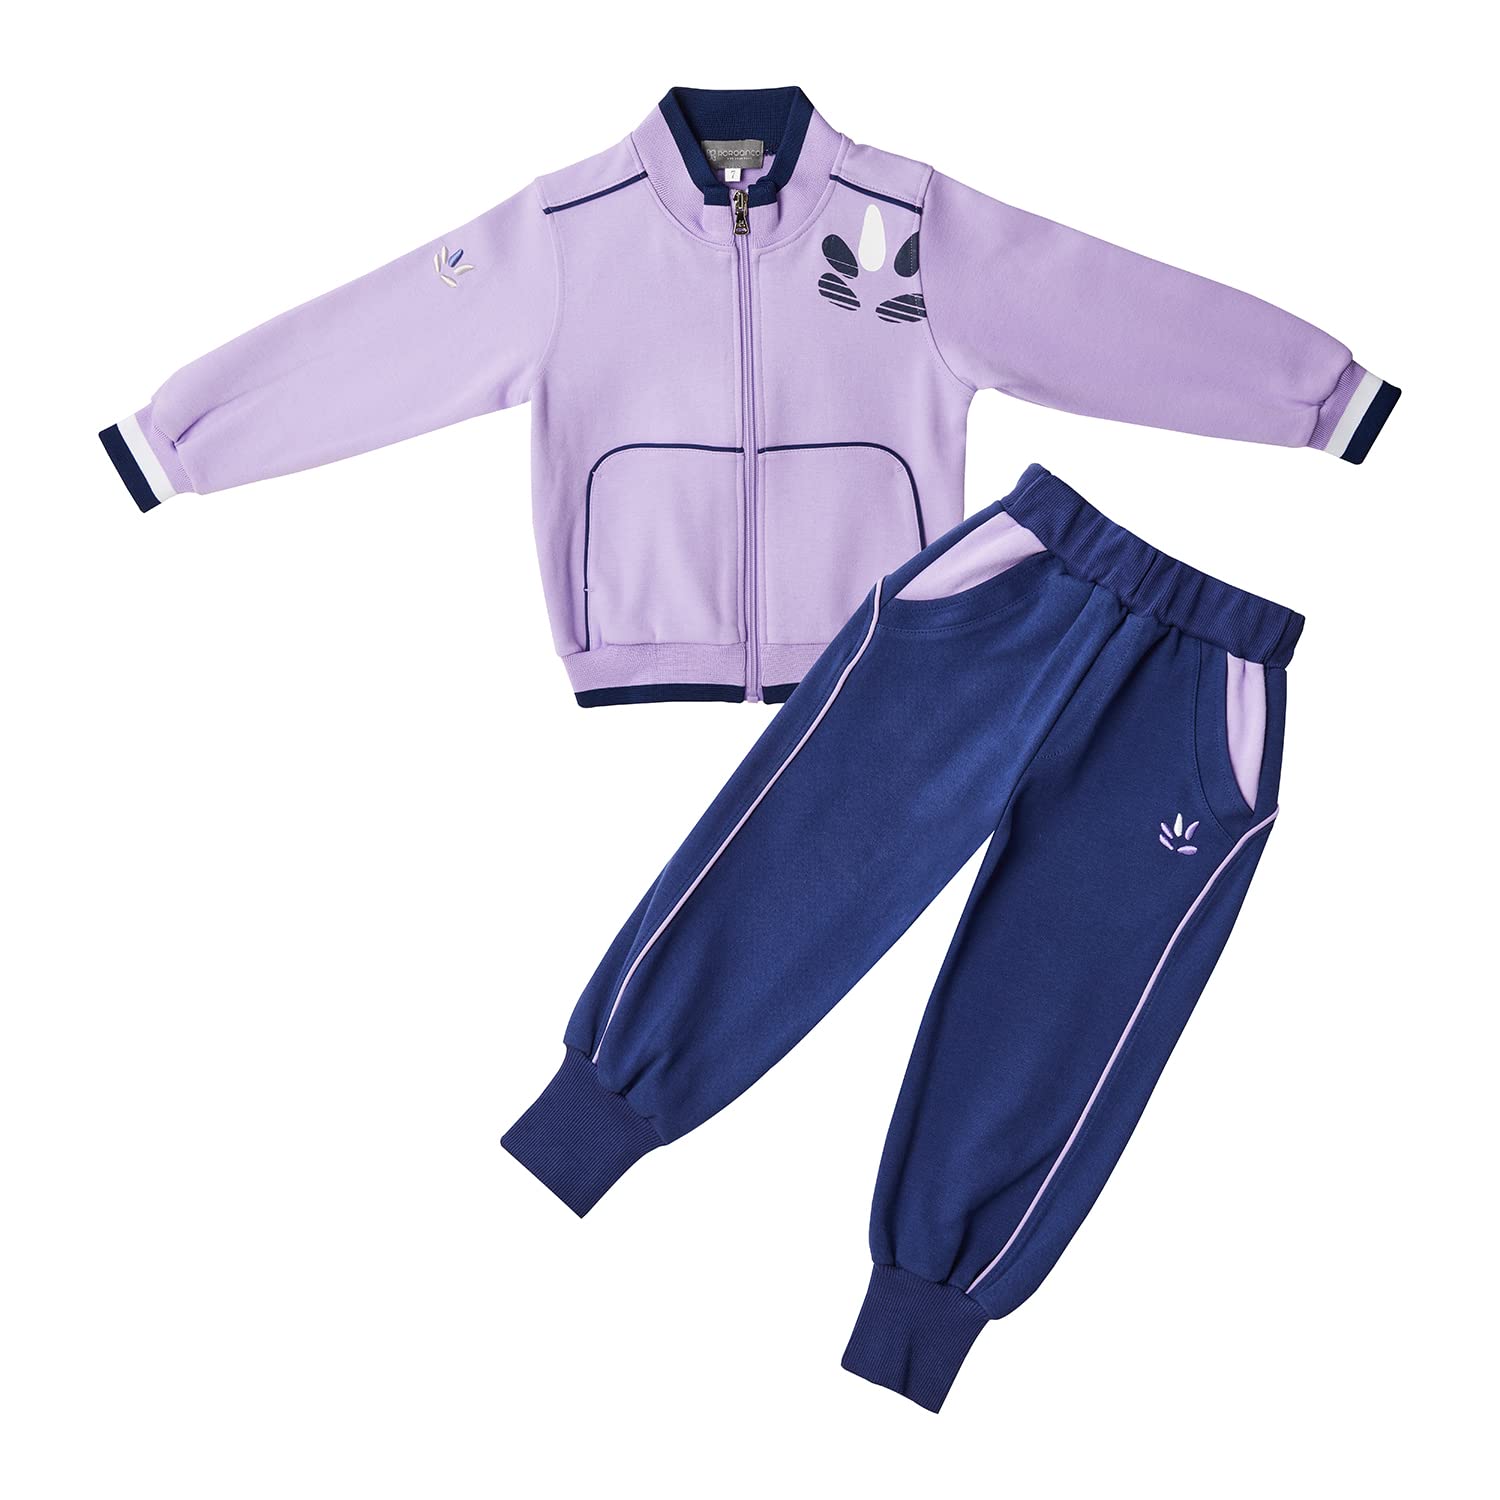 ROROANCO Activewear Kids Clothing Sets Tracksuits Active Hoodie, Pullover Jacket, Long Sleeve Shirts + Joggers 2 Piece